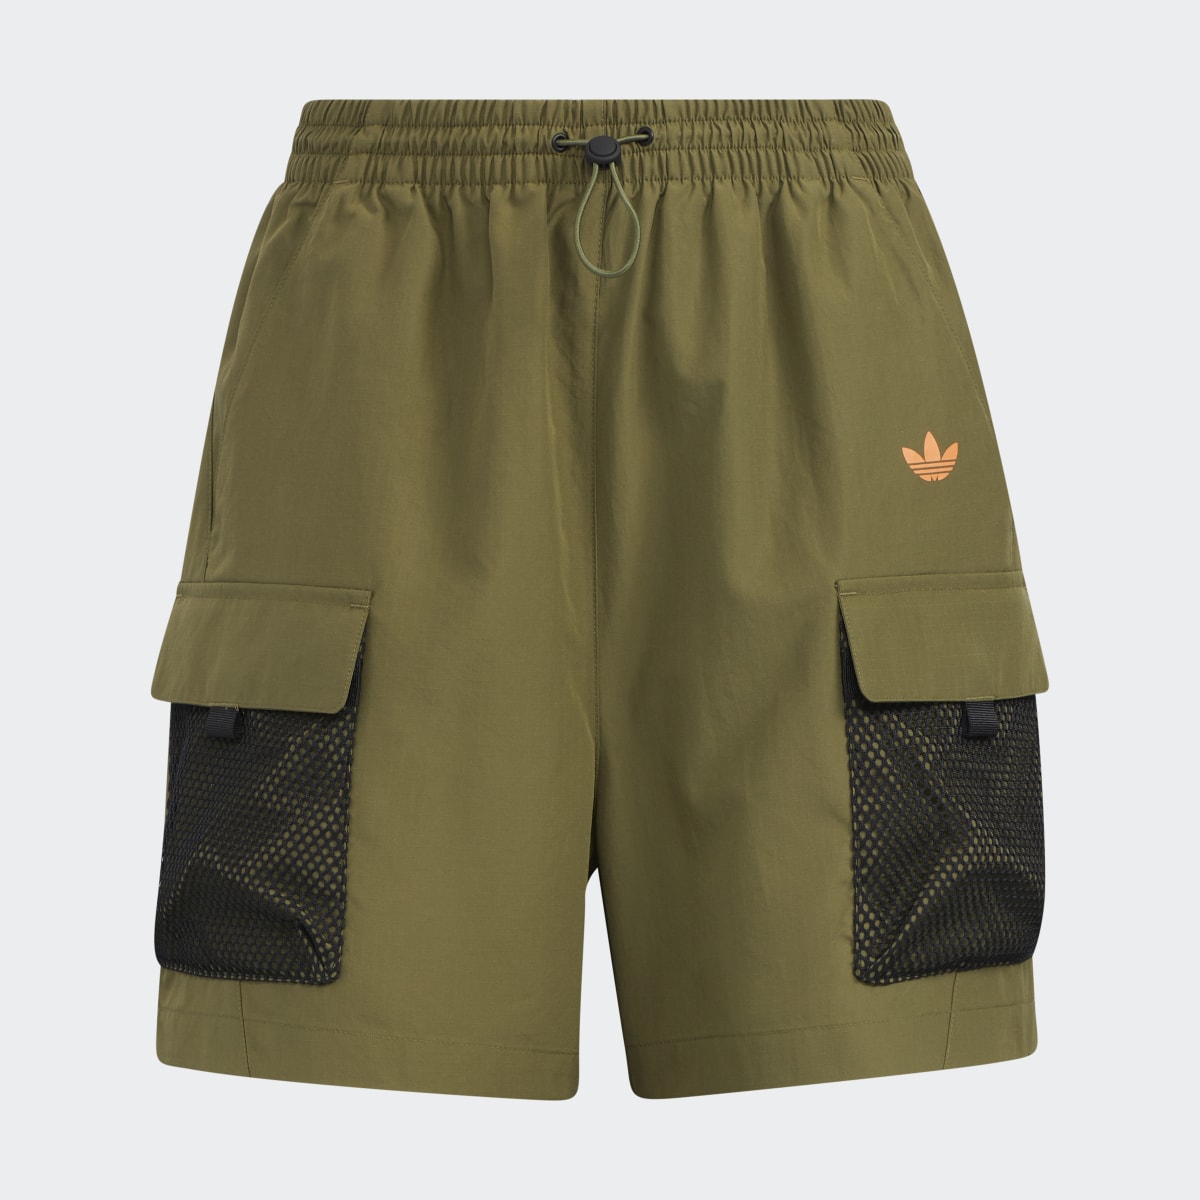 Adidas Outdoor Graphic Shorts. 4